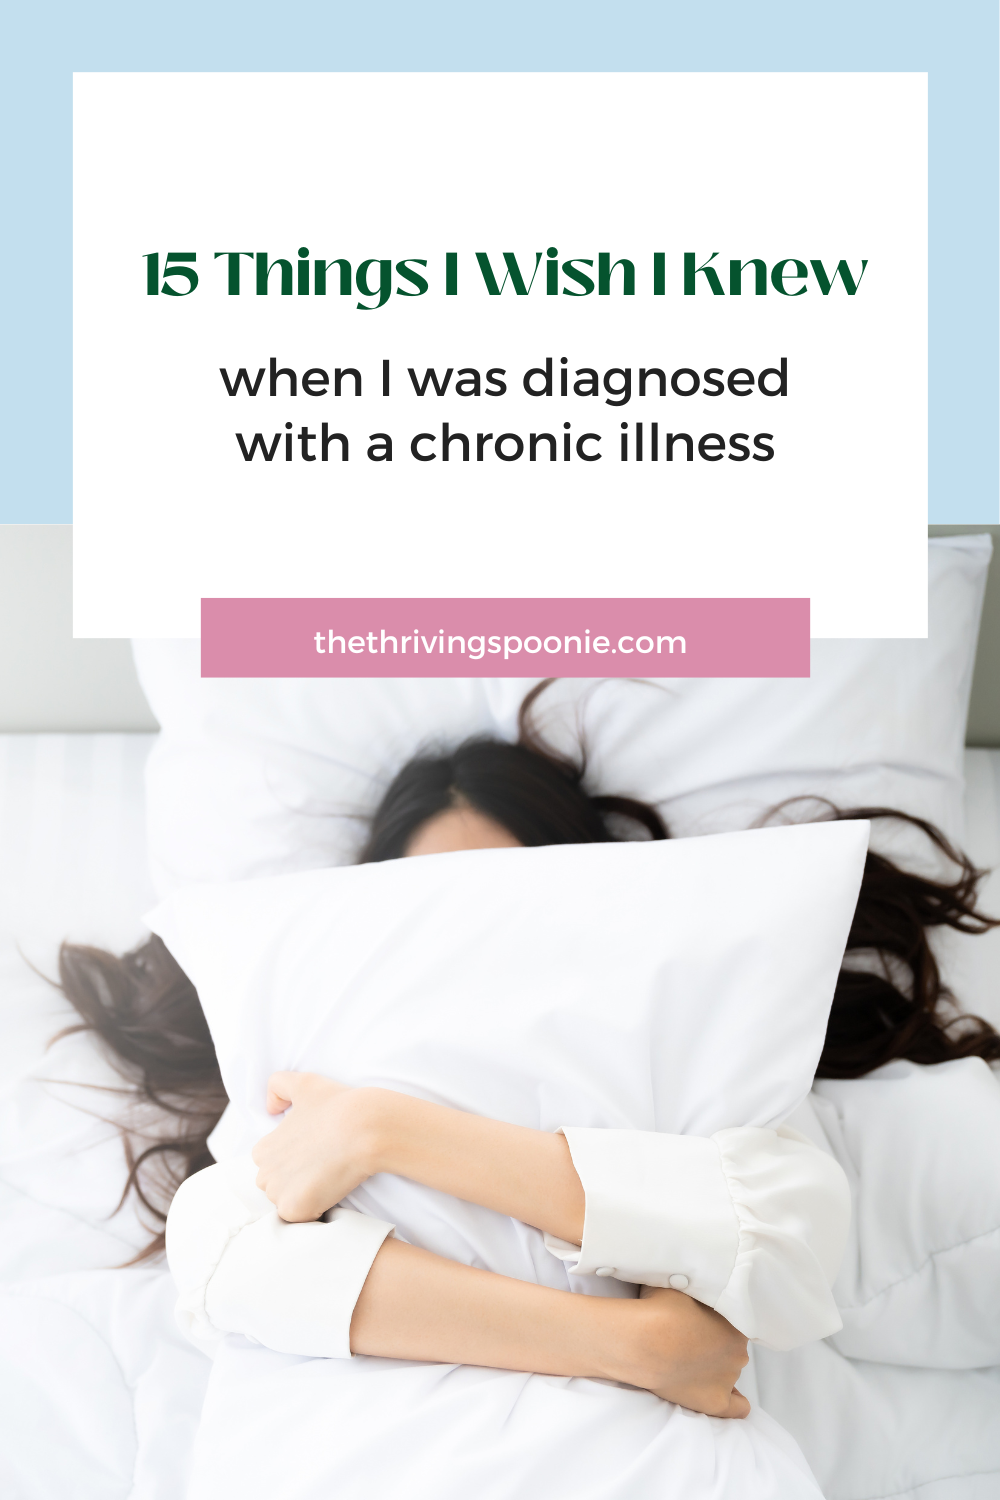 Here are the 15 things that I wish I knew when I was diagnosed with a chronic illness. I’m sharing these in the hopes that if you’re newly diagnosed, you’ll get some of the emotional support I wish I had at that time.